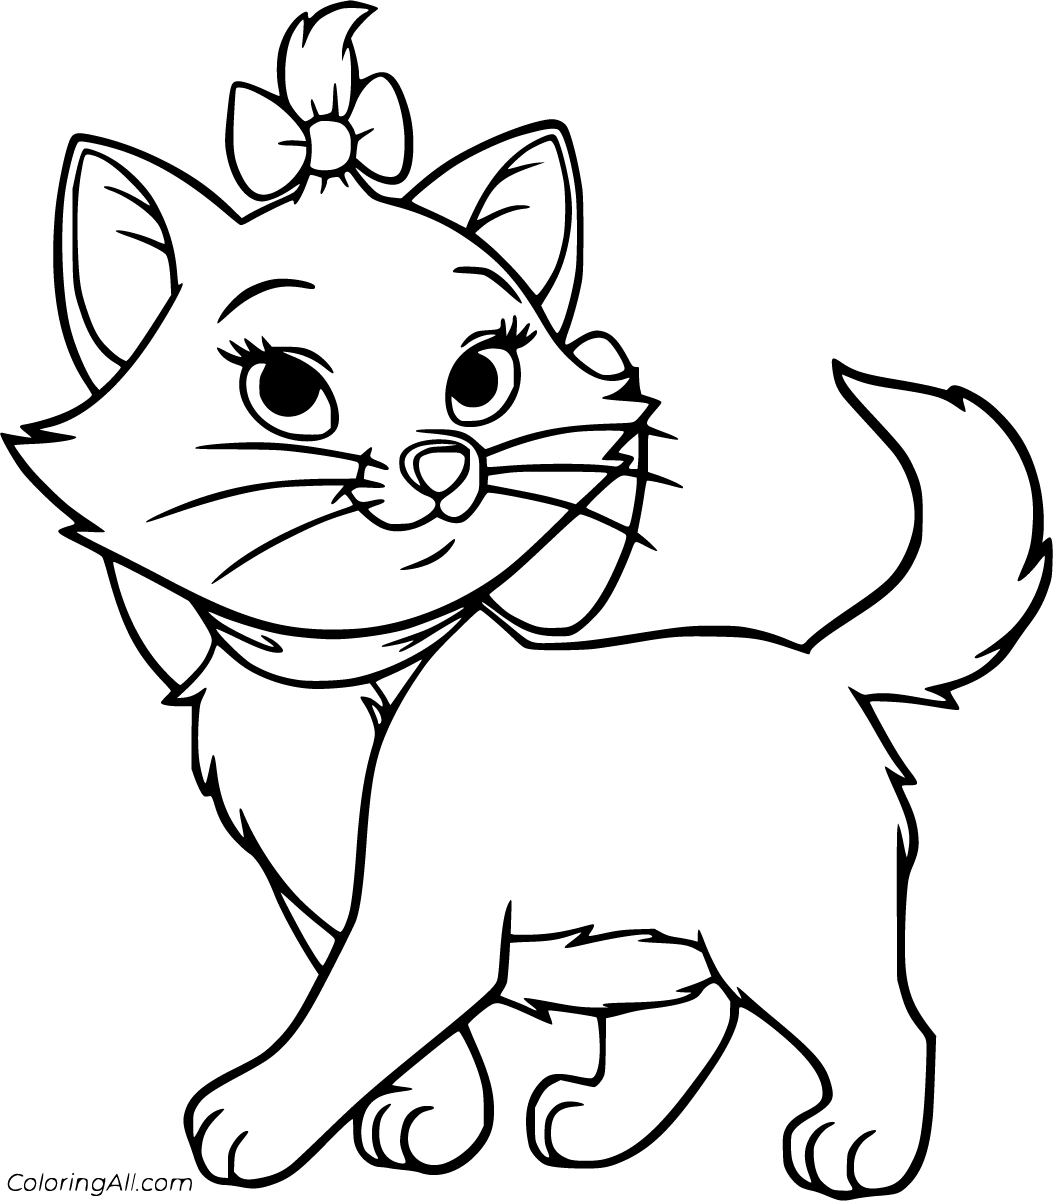 Aristocats Coloring Pages - ColoringAll